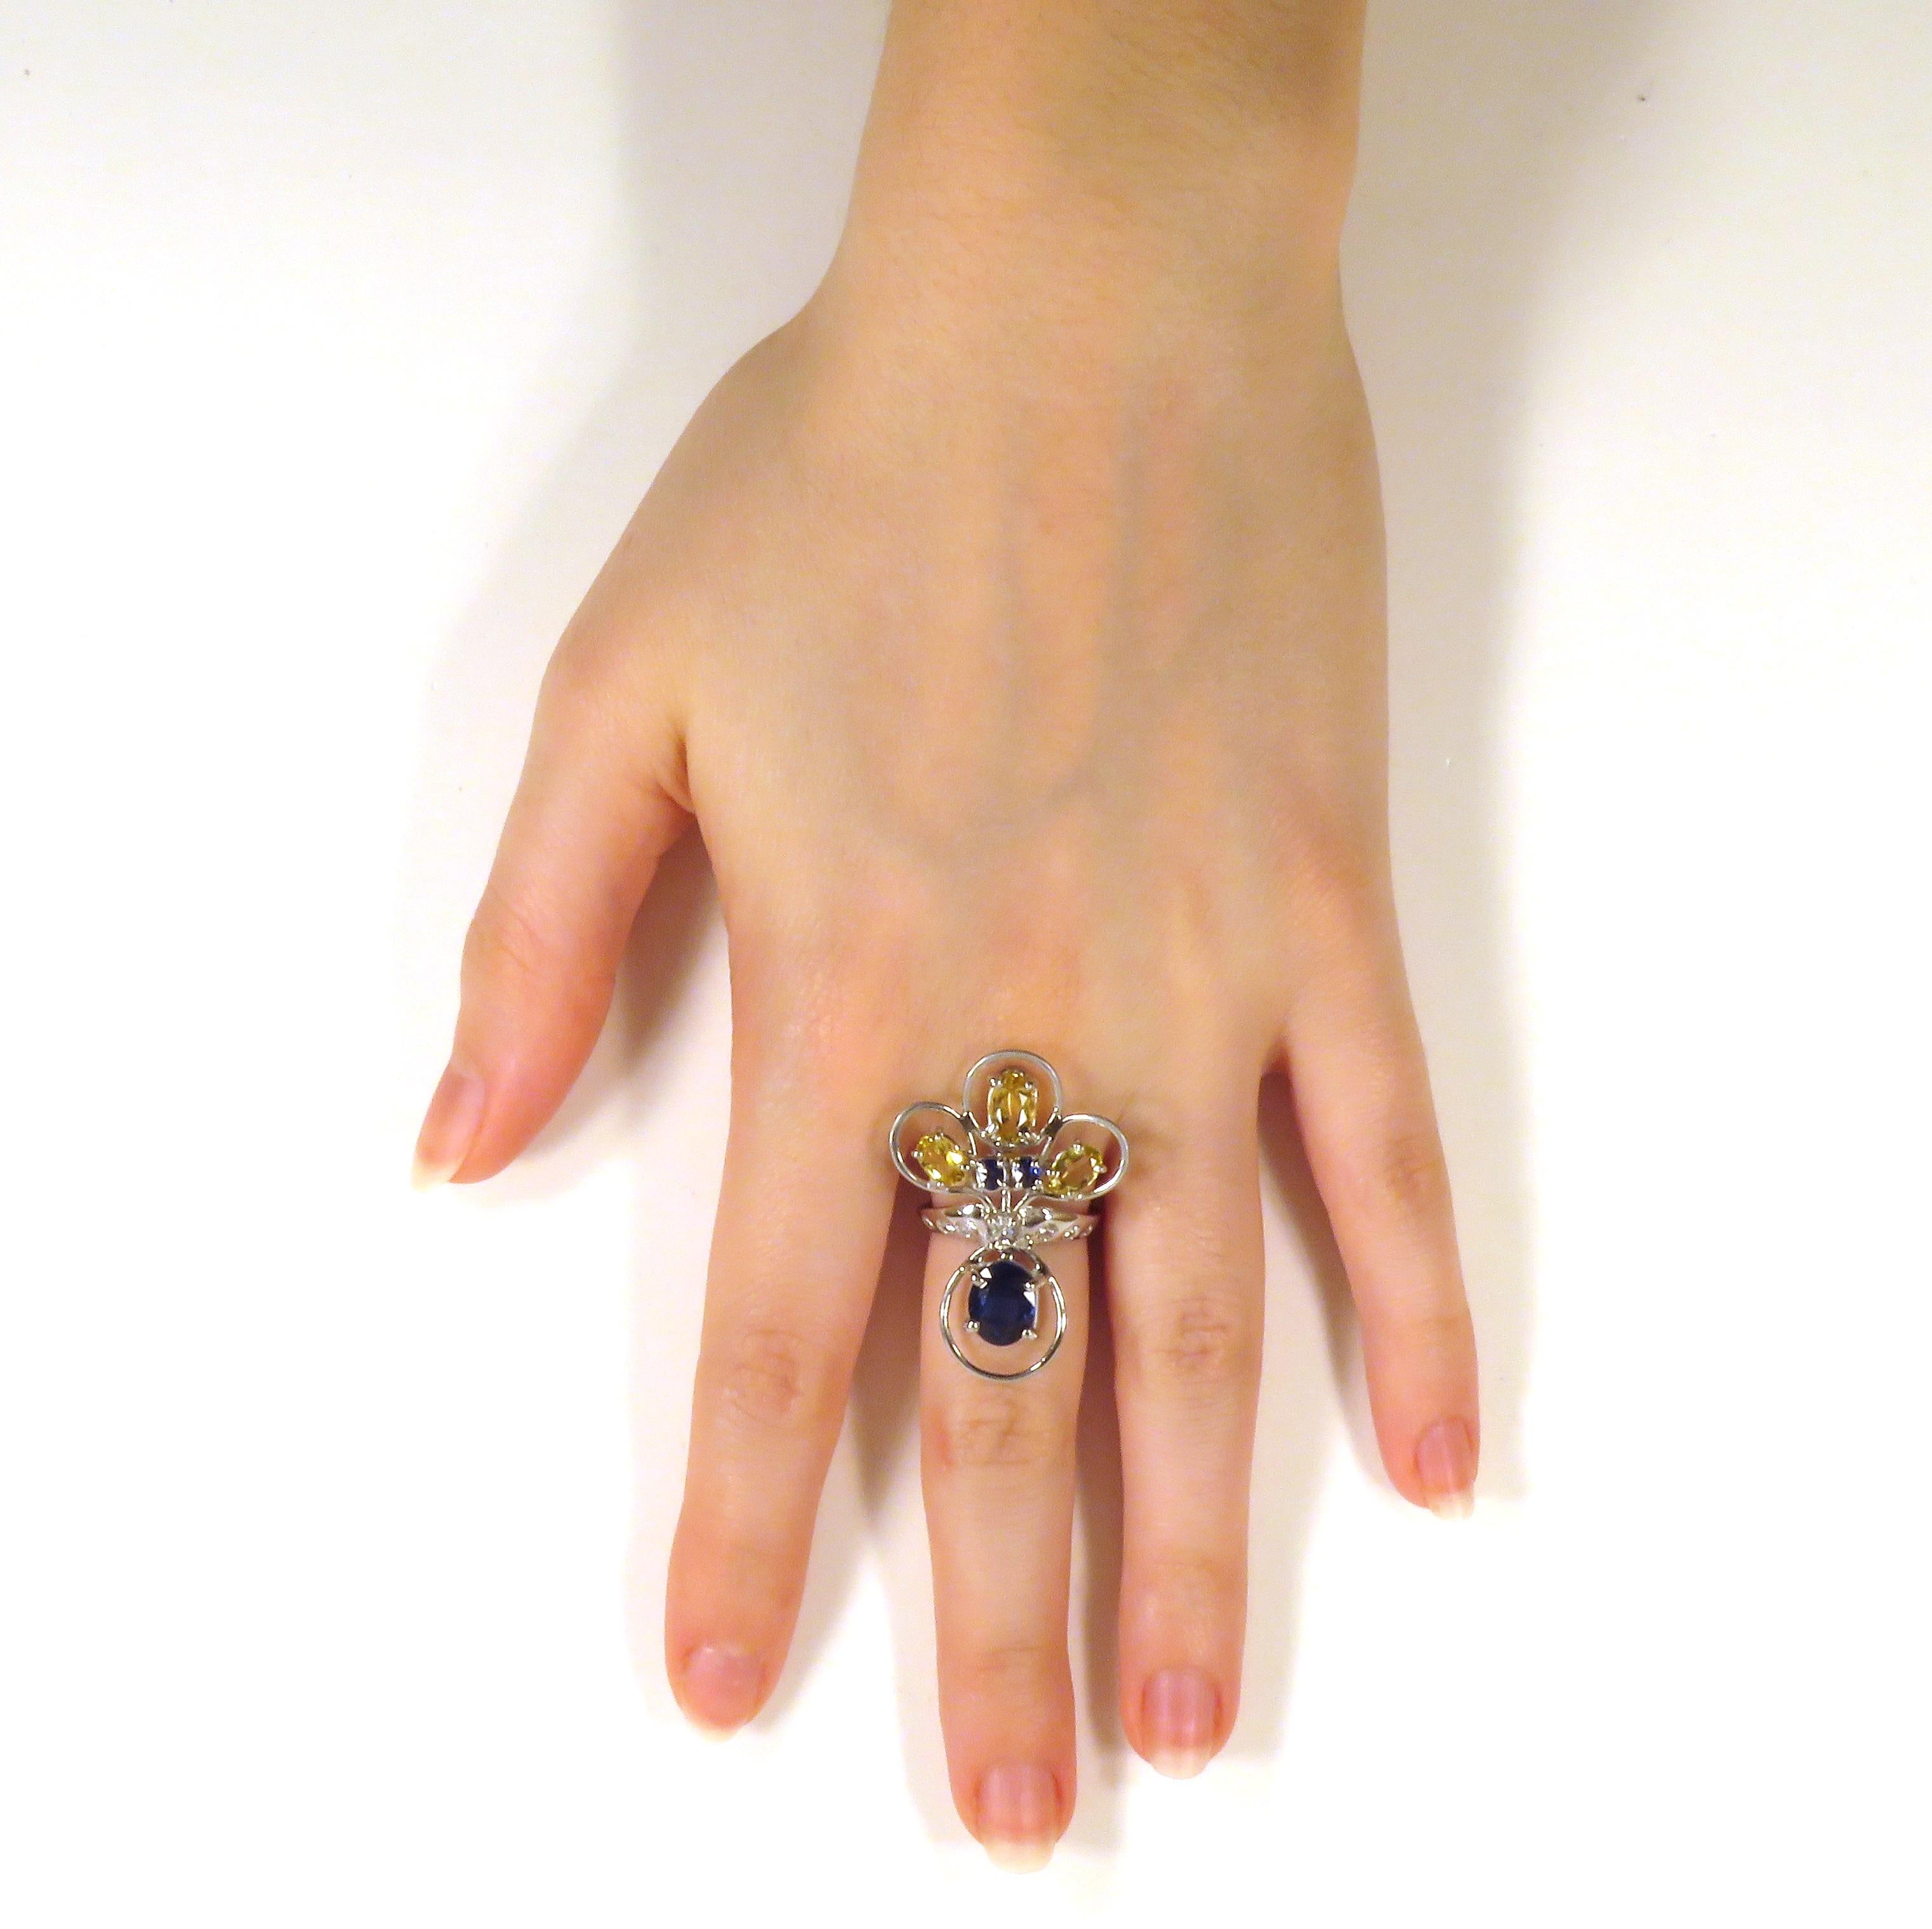 Brilliant Cut Sapphires Beryls Diamonds Gold Ring Handcrafted In Italy By Botta Gioielli For Sale